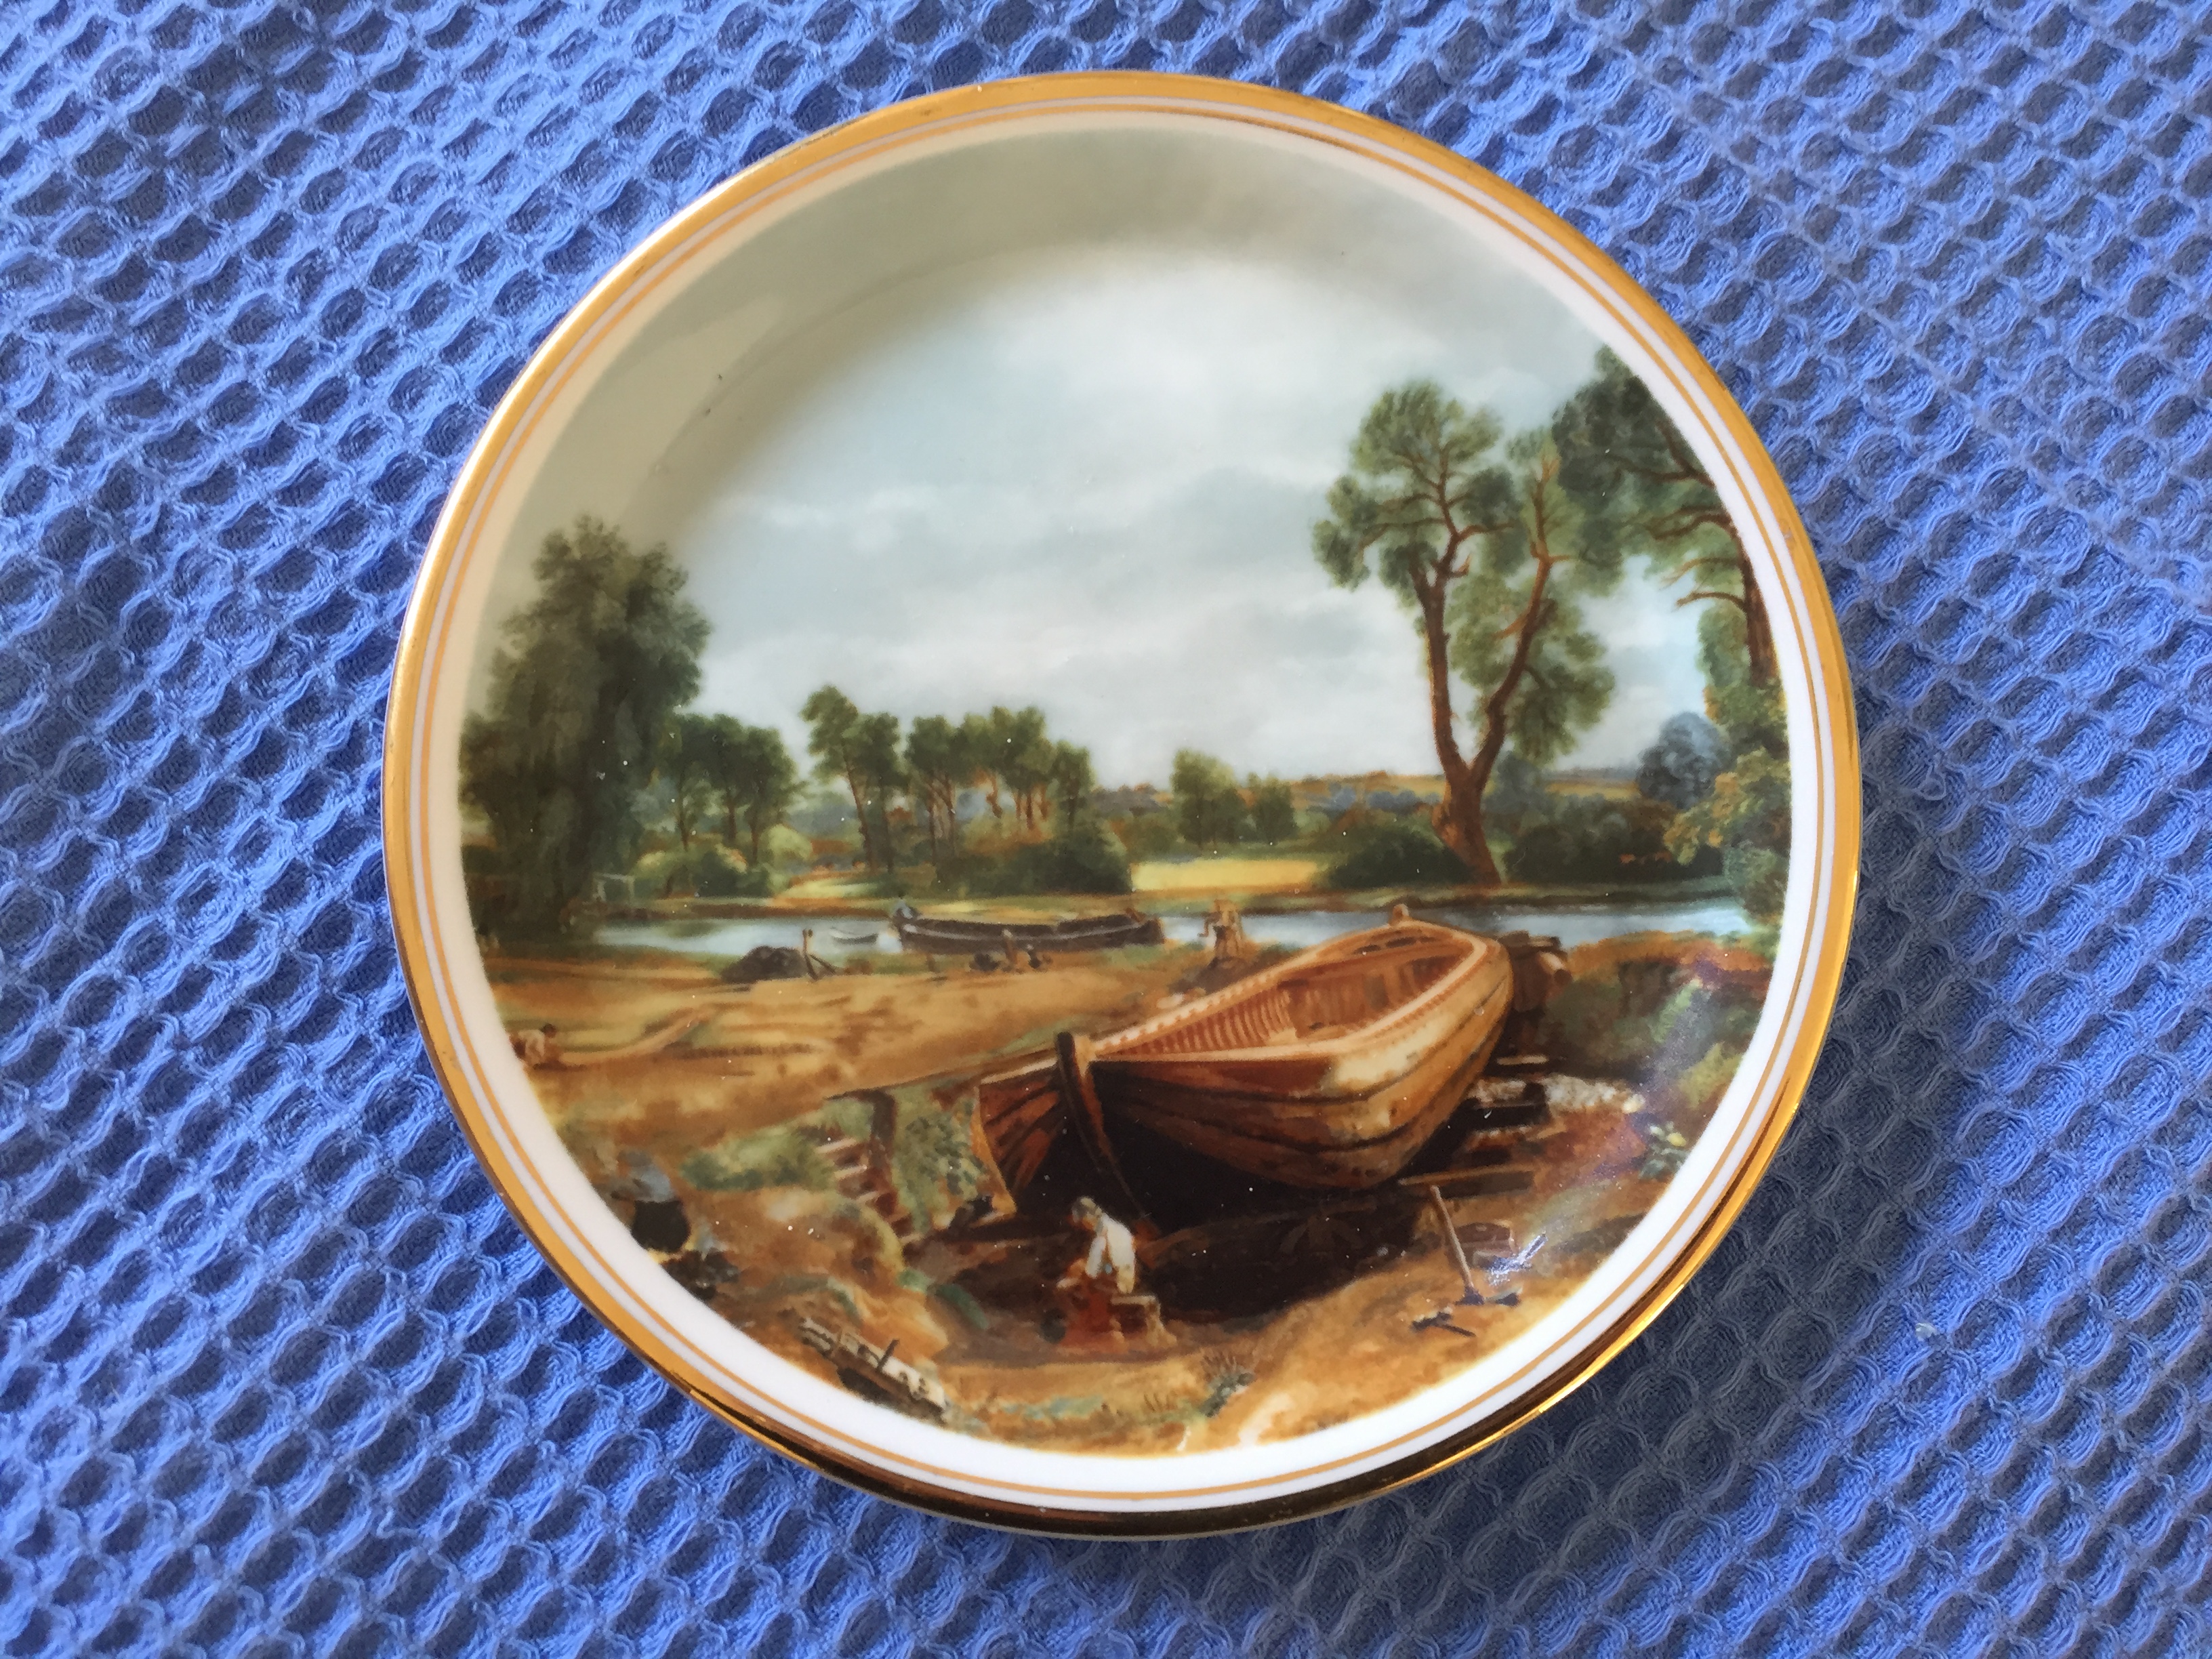 SOUVENIR DISPLAY PLATE SHOWING A FAMOUS PICTURE FROM JOHN CONSTABLE